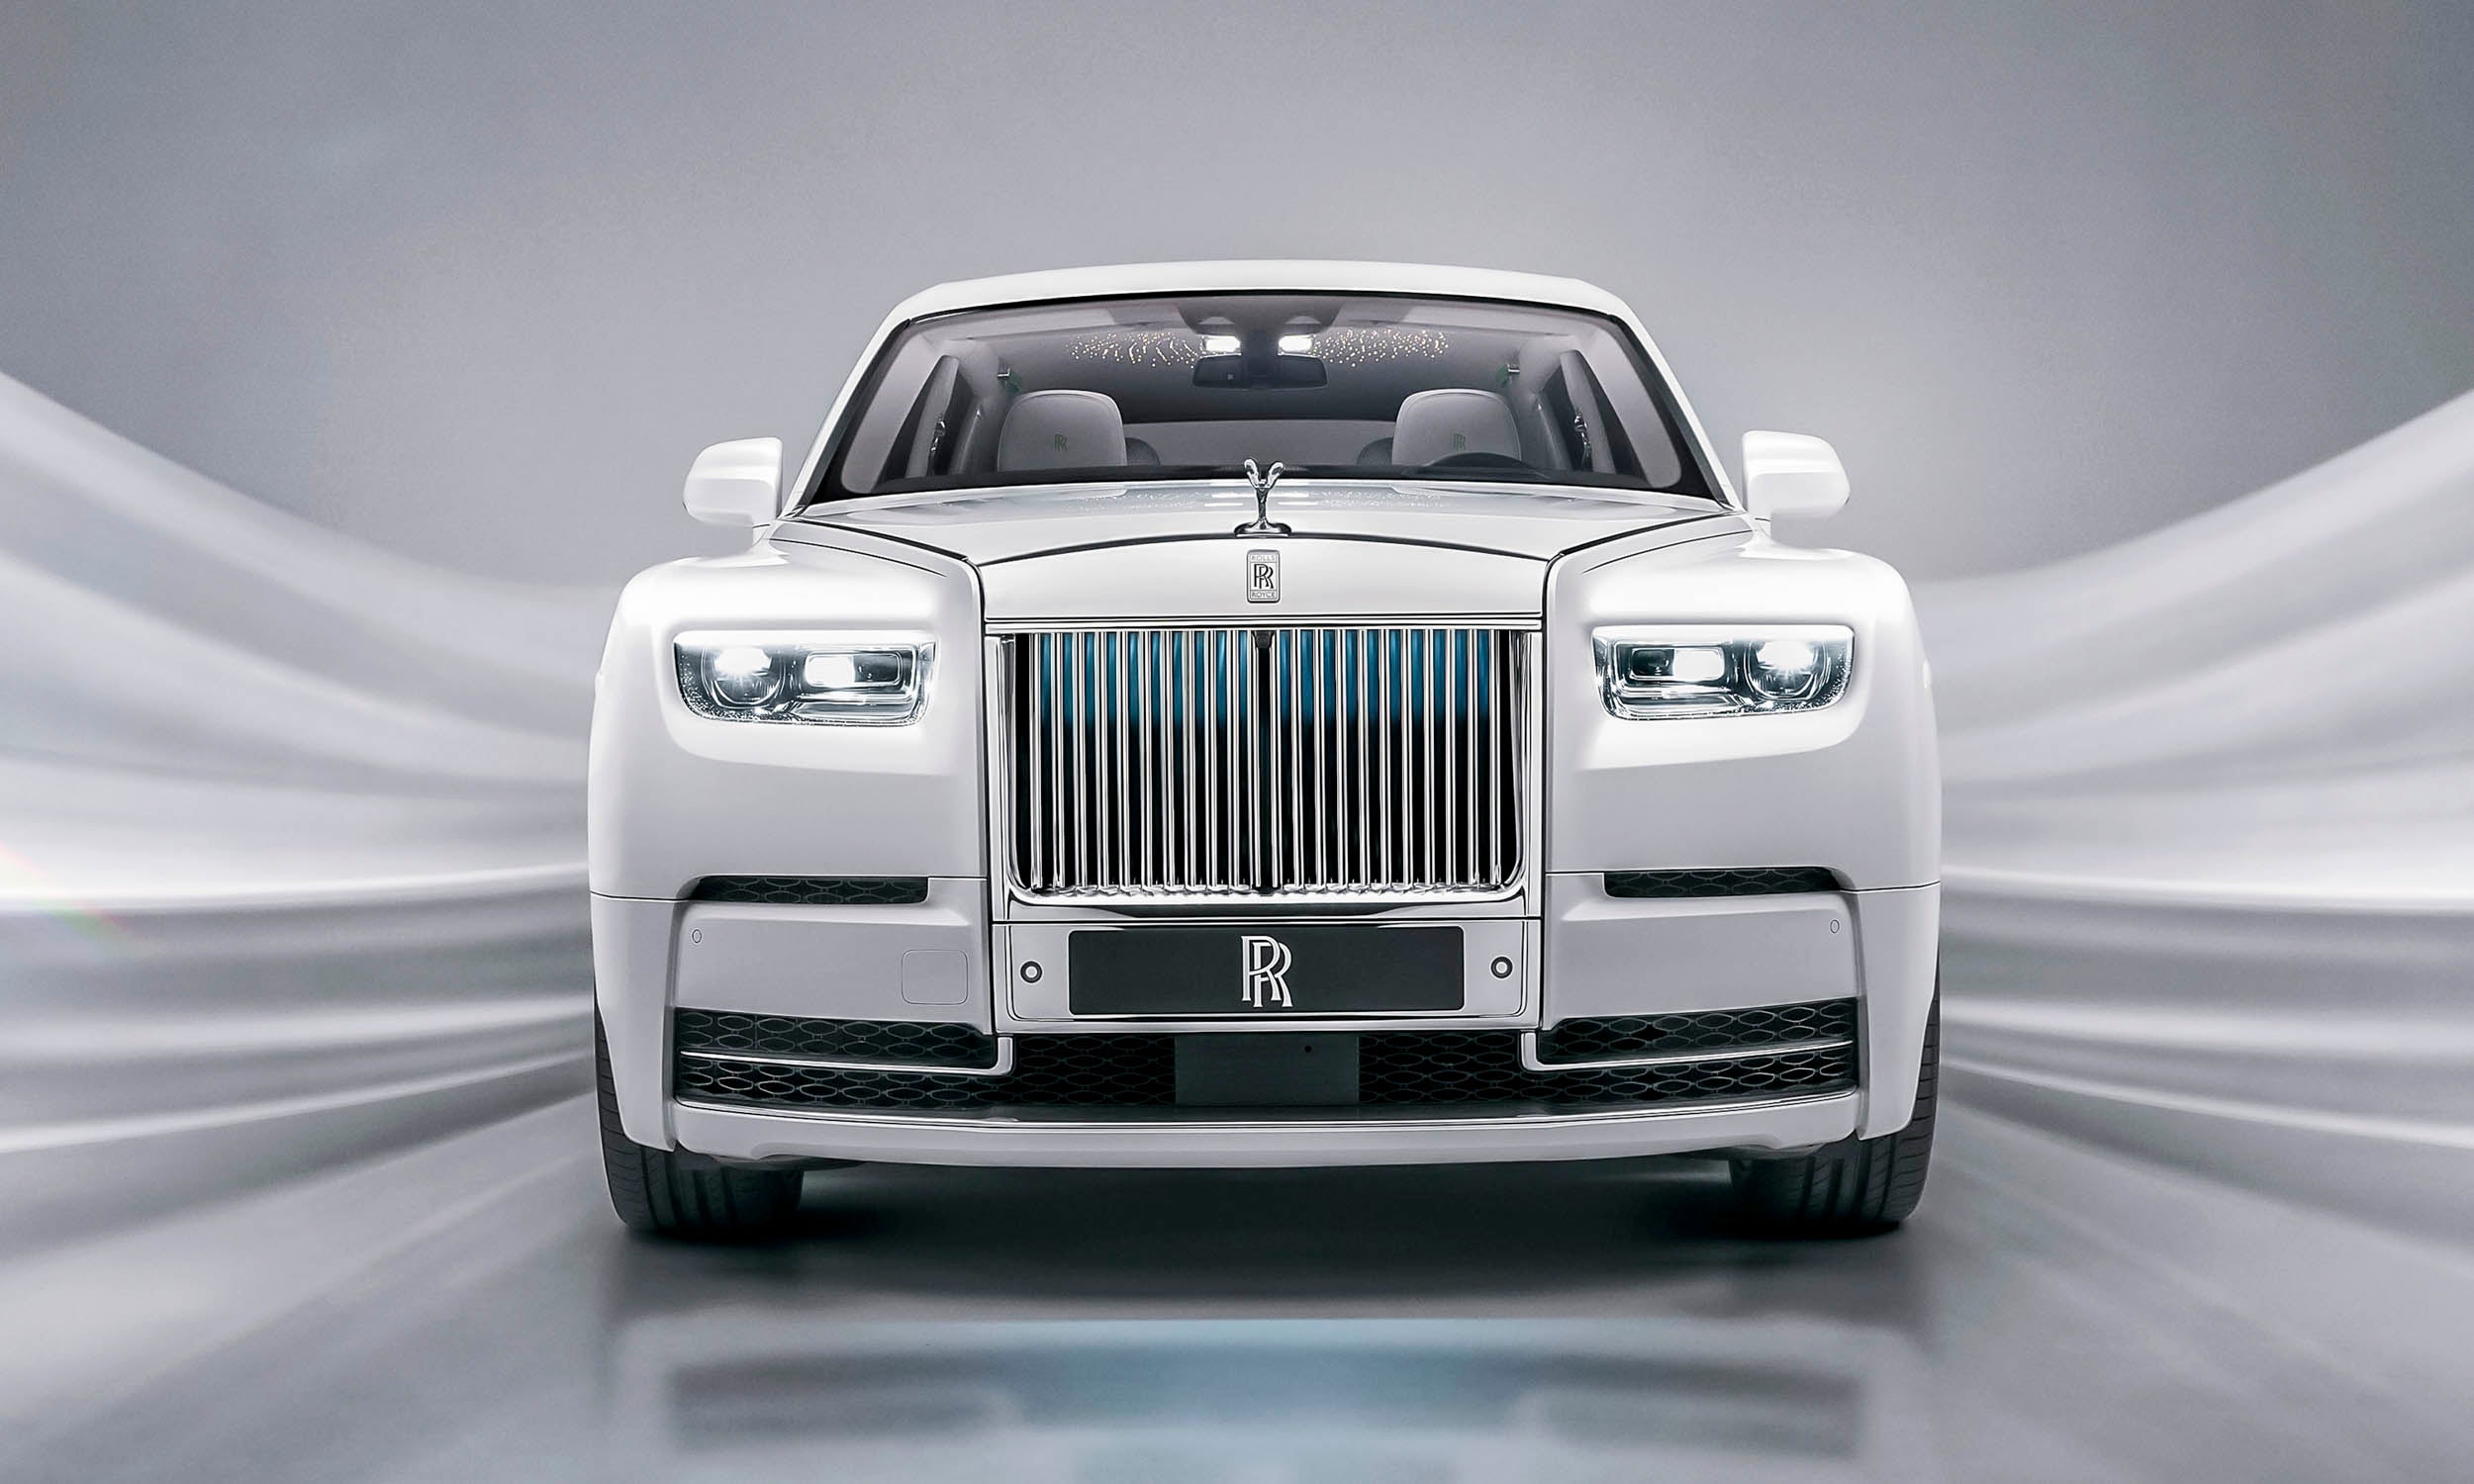 King of the road New RollsRoyce Phantom marks the end of the era of  opulence  HT Auto